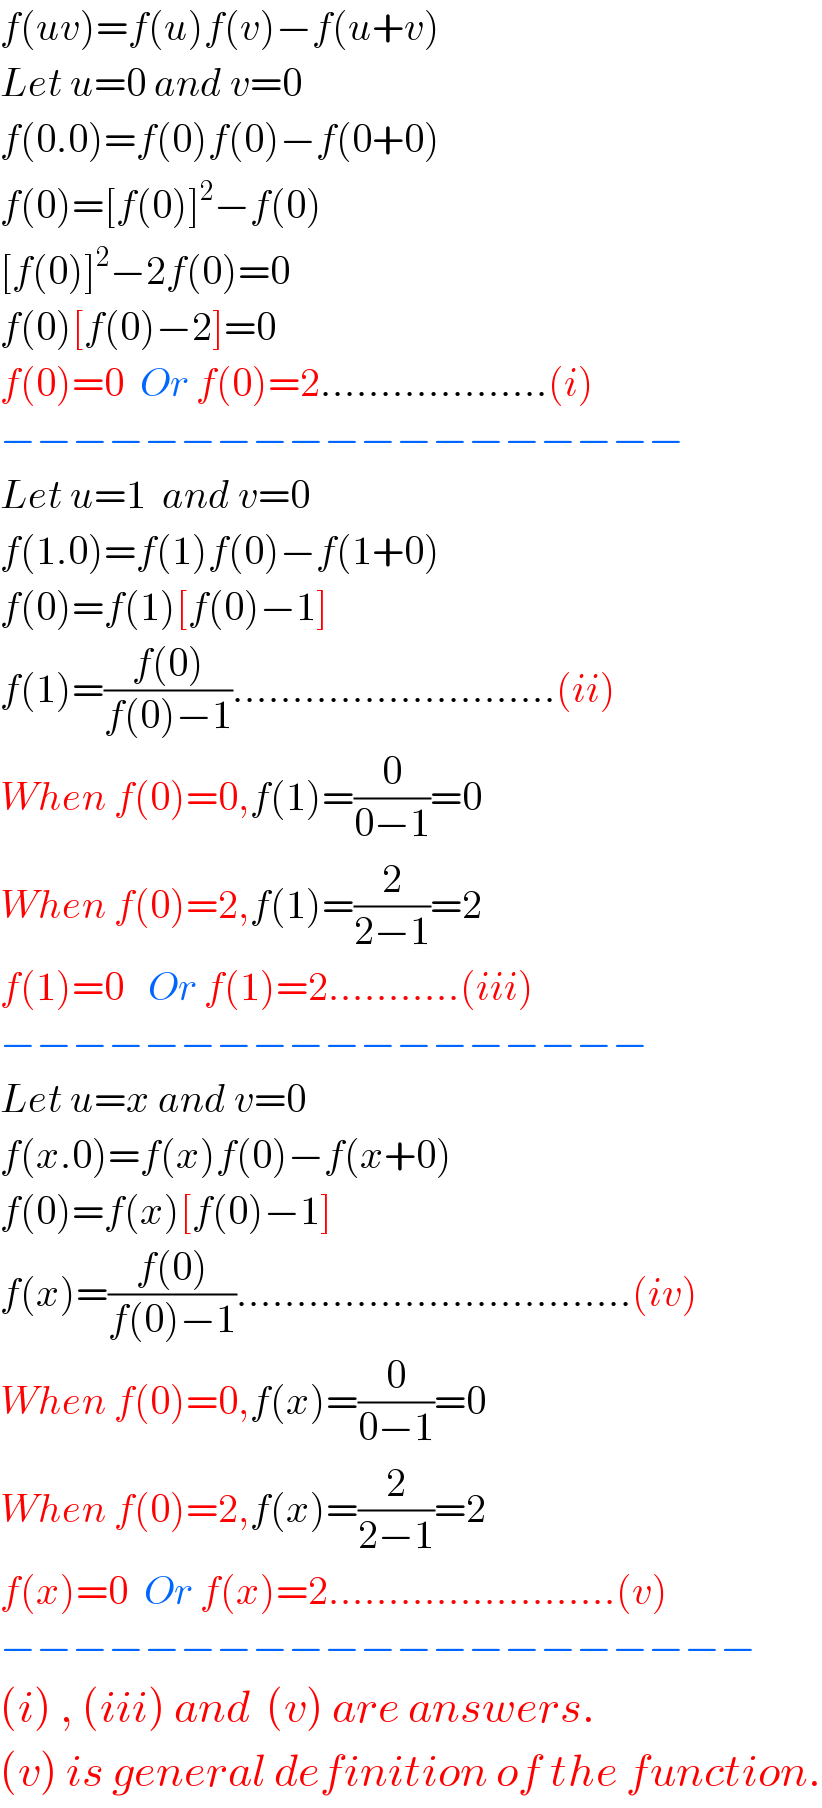 f(uv)=f(u)f(v)−f(u+v)  Let u=0 and v=0  f(0.0)=f(0)f(0)−f(0+0)  f(0)=[f(0)]^2 −f(0)  [f(0)]^2 −2f(0)=0  f(0)[f(0)−2]=0  f(0)=0  Or f(0)=2...................(i)  −−−−−−−−−−−−−−−−−−−  Let u=1  and v=0  f(1.0)=f(1)f(0)−f(1+0)  f(0)=f(1)[f(0)−1]  f(1)=((f(0))/(f(0)−1))...........................(ii)  When f(0)=0,f(1)=(0/(0−1))=0  When f(0)=2,f(1)=(2/(2−1))=2  f(1)=0   Or f(1)=2...........(iii)  −−−−−−−−−−−−−−−−−−  Let u=x and v=0  f(x.0)=f(x)f(0)−f(x+0)  f(0)=f(x)[f(0)−1]  f(x)=((f(0))/(f(0)−1)).................................(iv)  When f(0)=0,f(x)=(0/(0−1))=0  When f(0)=2,f(x)=(2/(2−1))=2  f(x)=0  Or f(x)=2........................(v)  −−−−−−−−−−−−−−−−−−−−−  (i) , (iii) and  (v) are answers.  (v) is general definition of the function.  